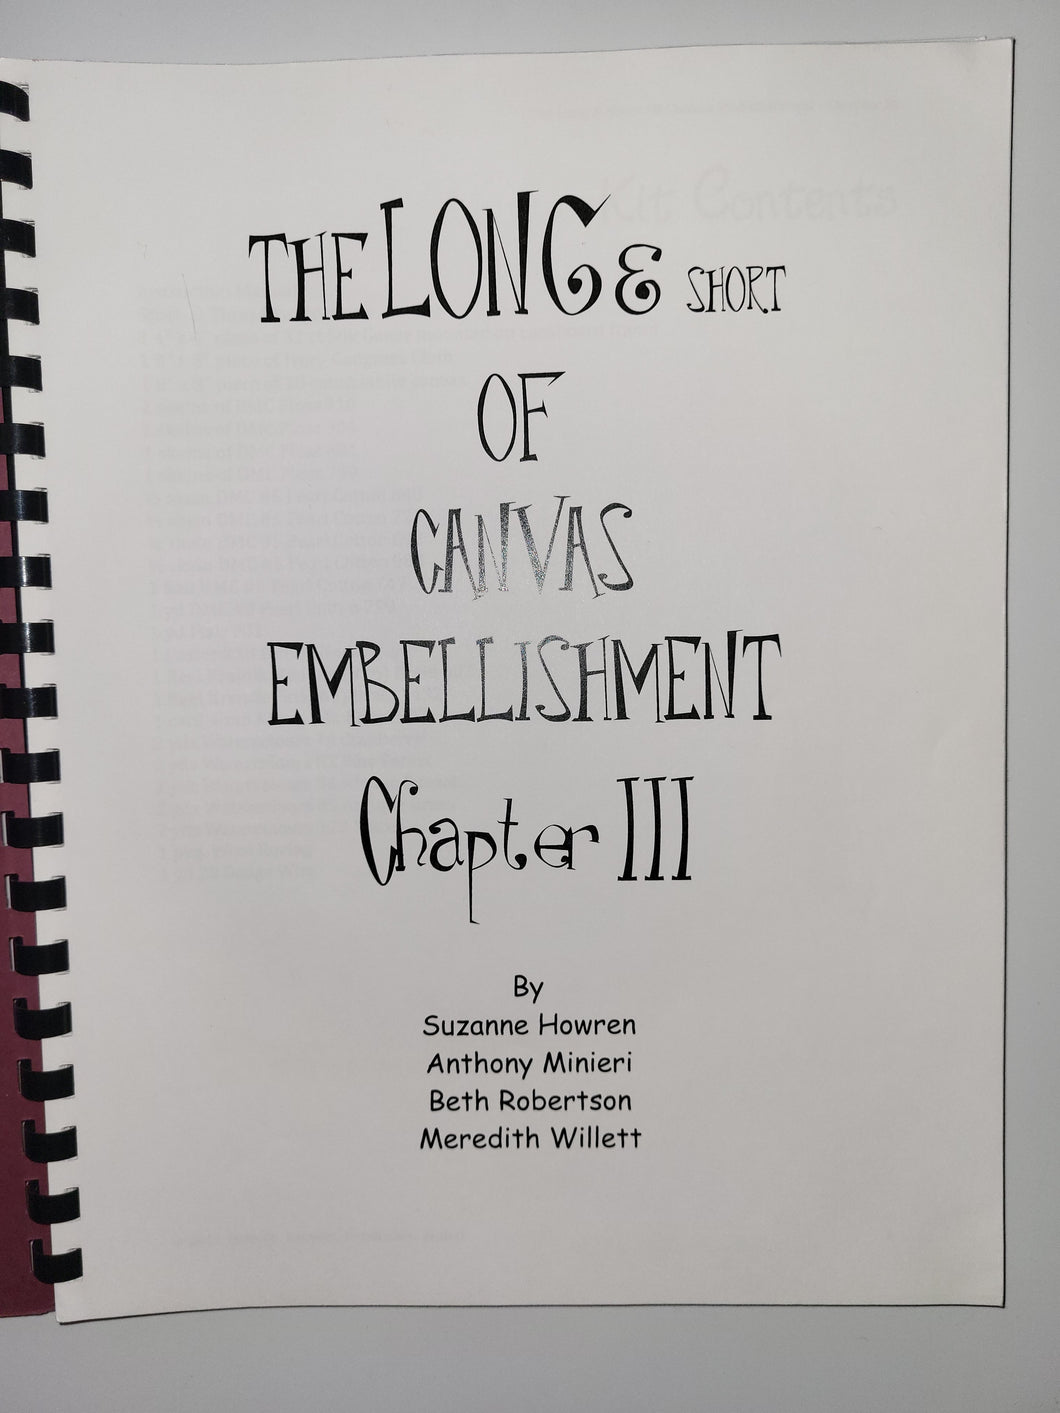 The Long & Short of Canvas Embellishment Chapter III